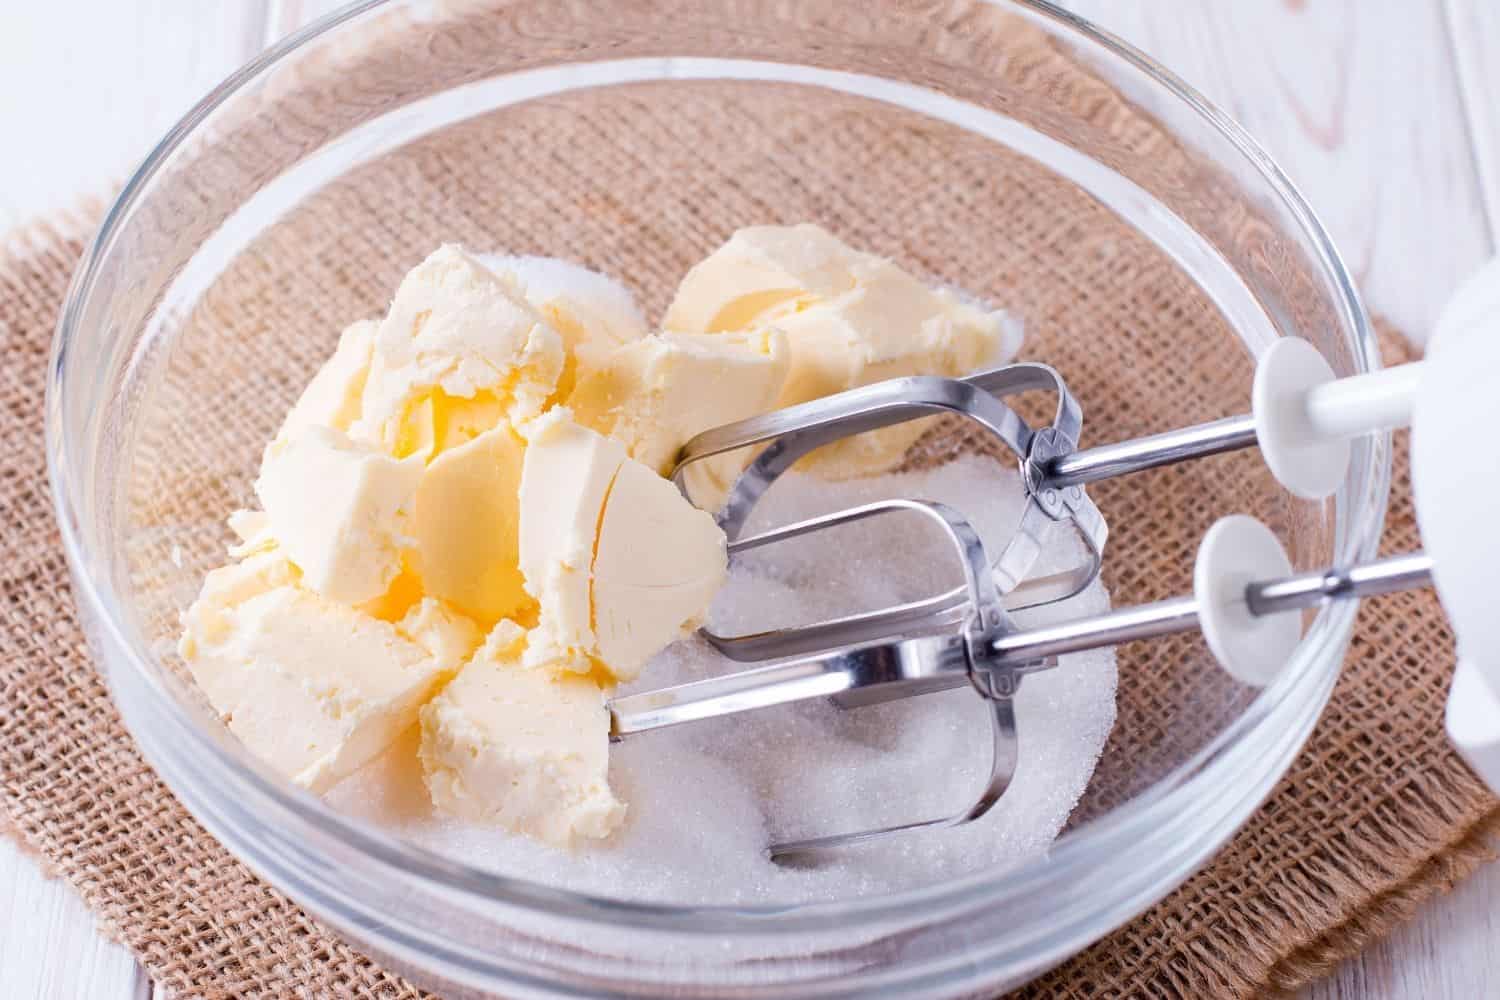 How to cream and what does it mean to cream when cooking?